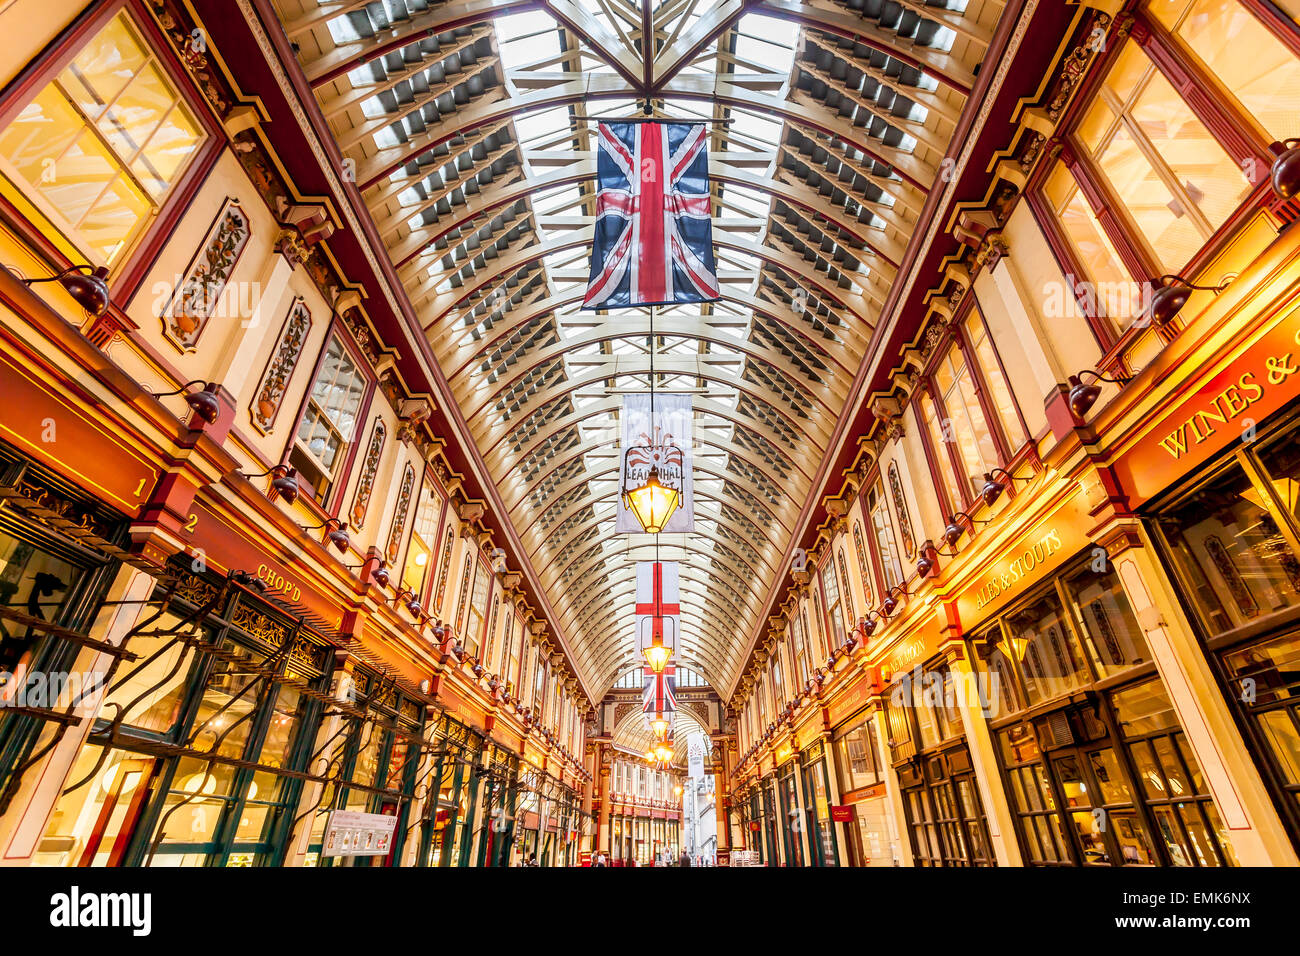 Leadenhall Market shopping arcade, Londres, Angleterre, Royaume-Uni Banque D'Images